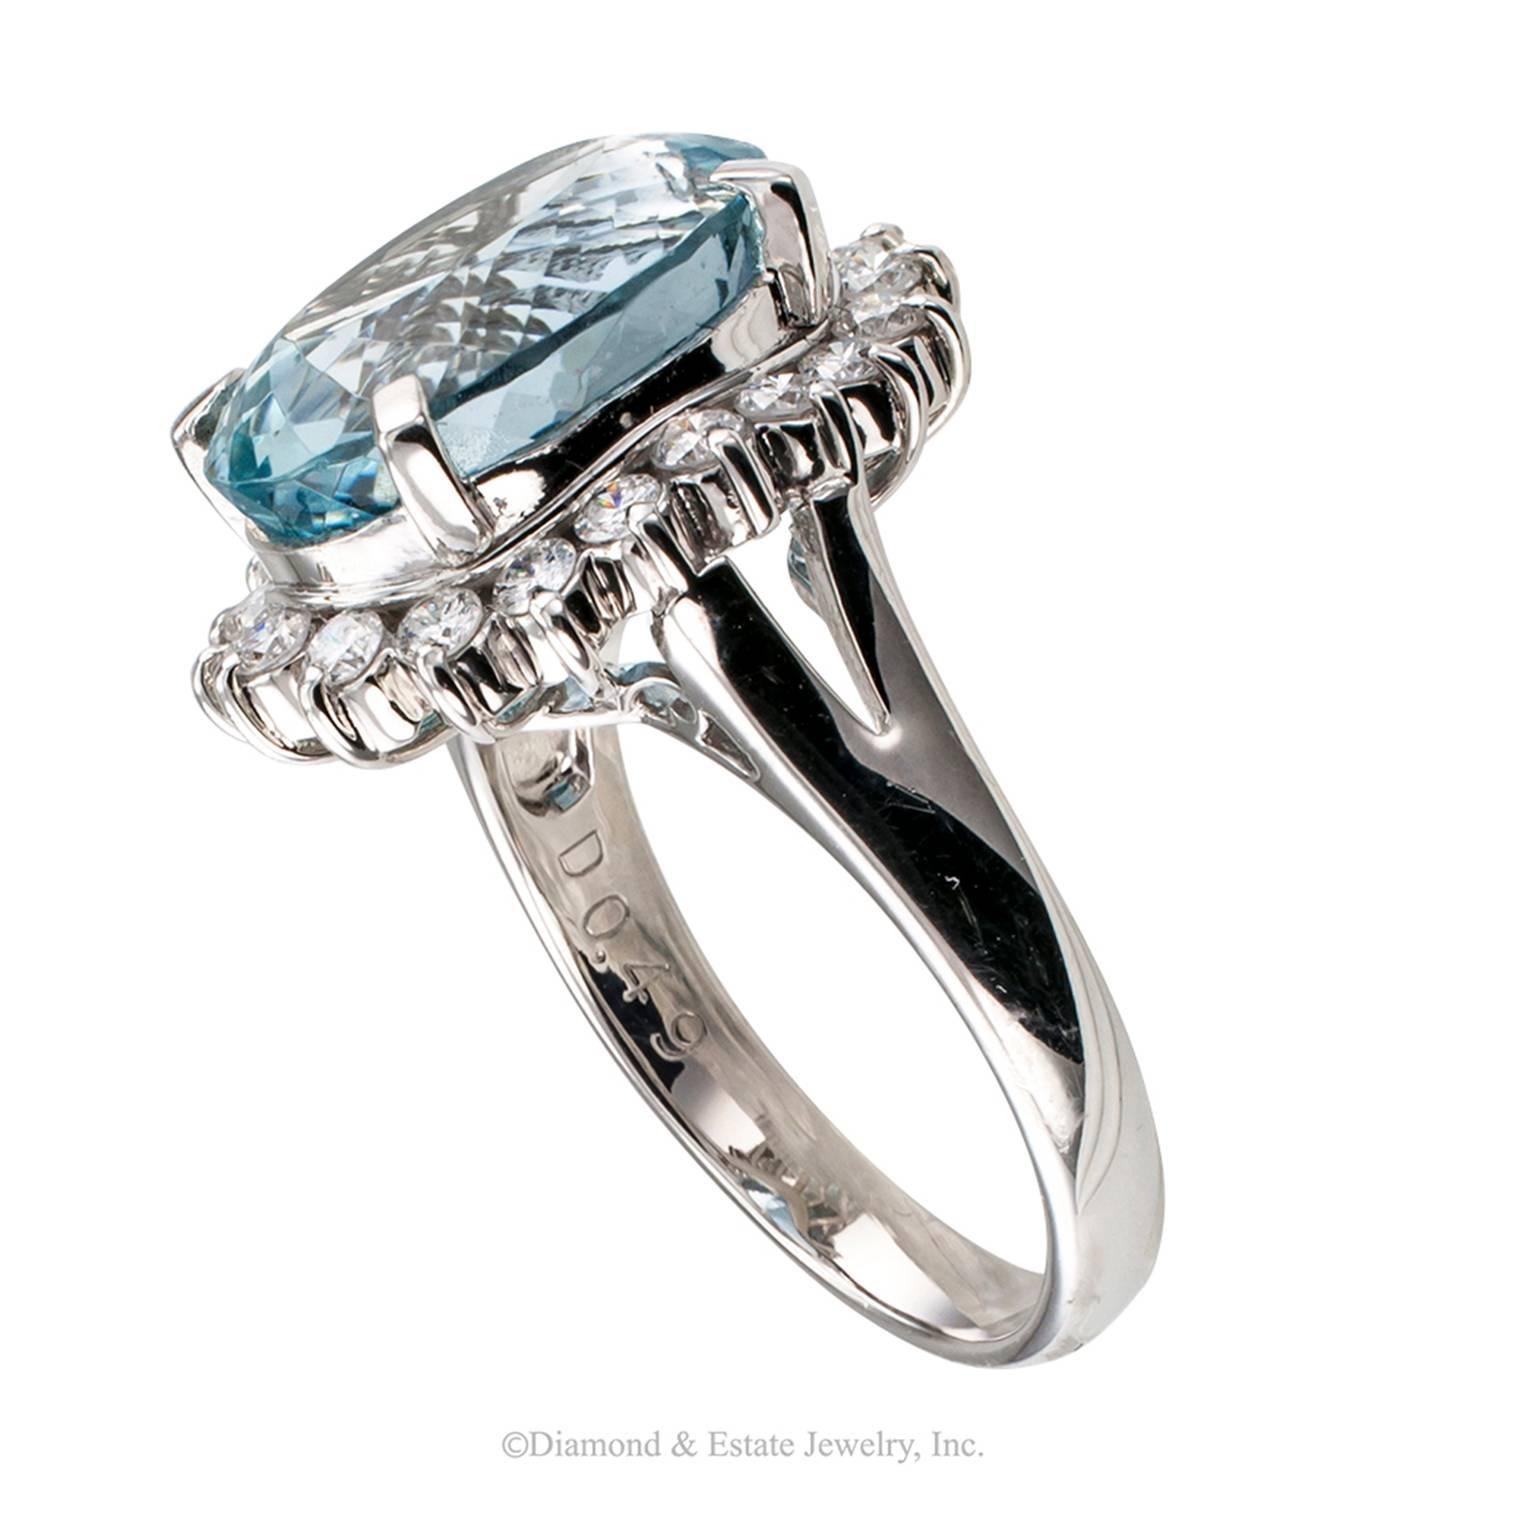 6.24 Carat Oval Aquamarine Diamond Platinum Ring

6.24 carats oval aquamarine and diamond platinum ring circa 1990.  A different twist on the classic halo ring design showcasing a moderate size oval aquamarine weighing 6.24 carats, displaying very